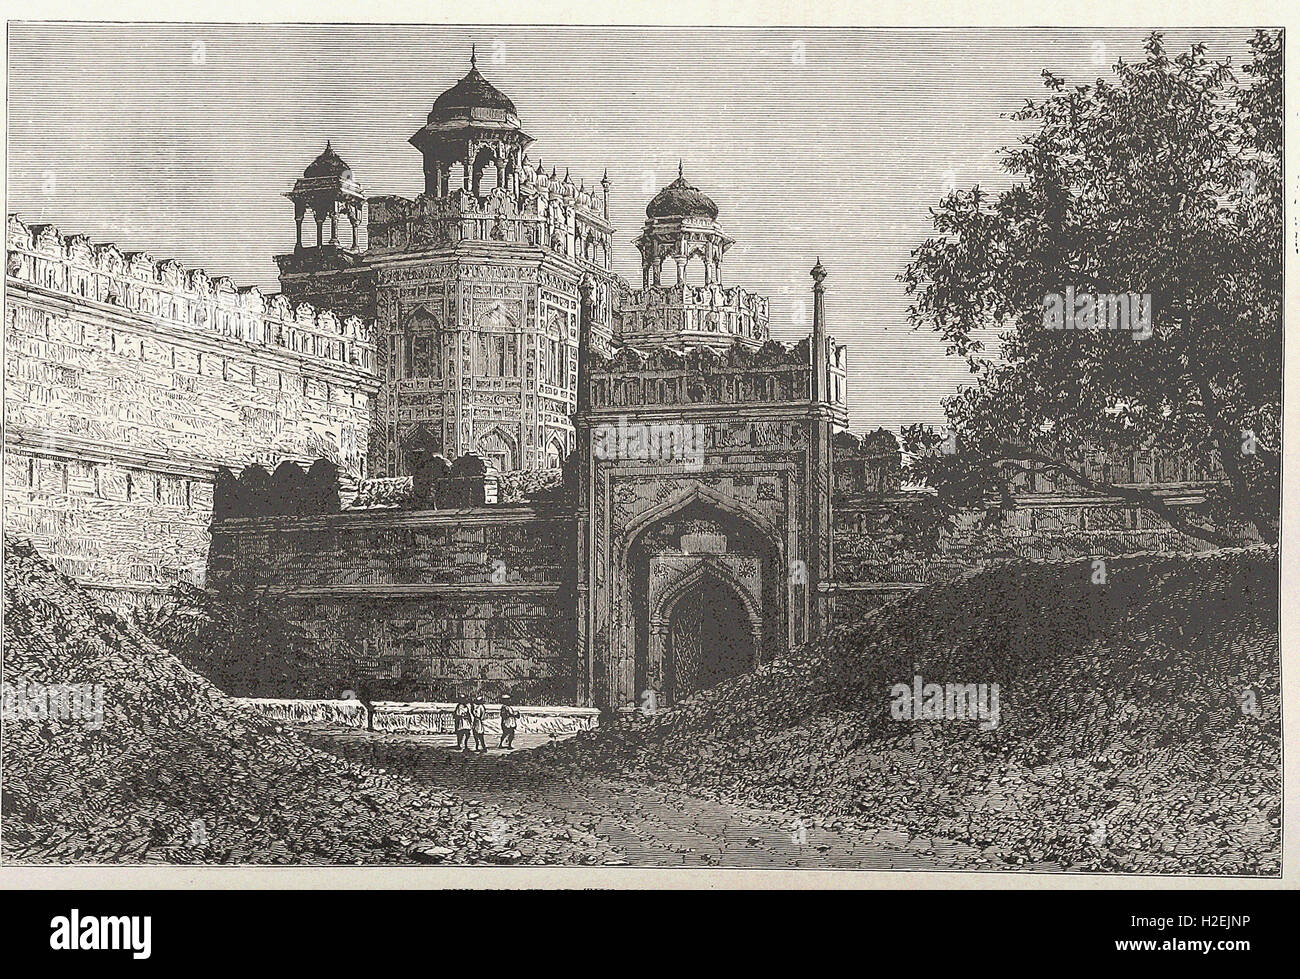 THE PALACE OF THE MOGUL EMPERORS, DELHI - from 'Cassell's Illustrated Universal History' - 1882 Stock Photo